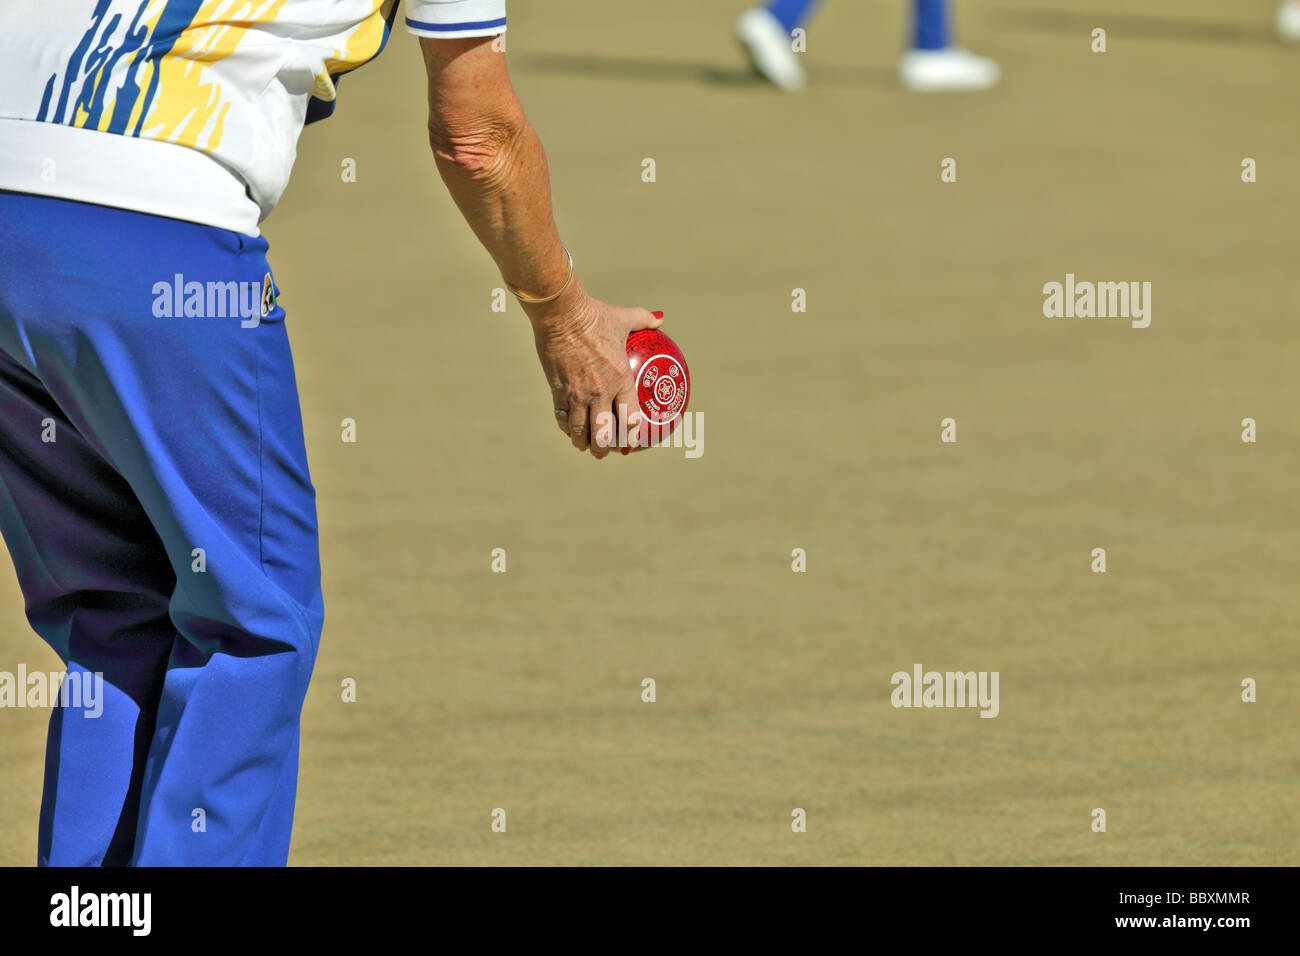 Woman at a lawn bowls tournament showing technique and bowling equipment Stock Photo